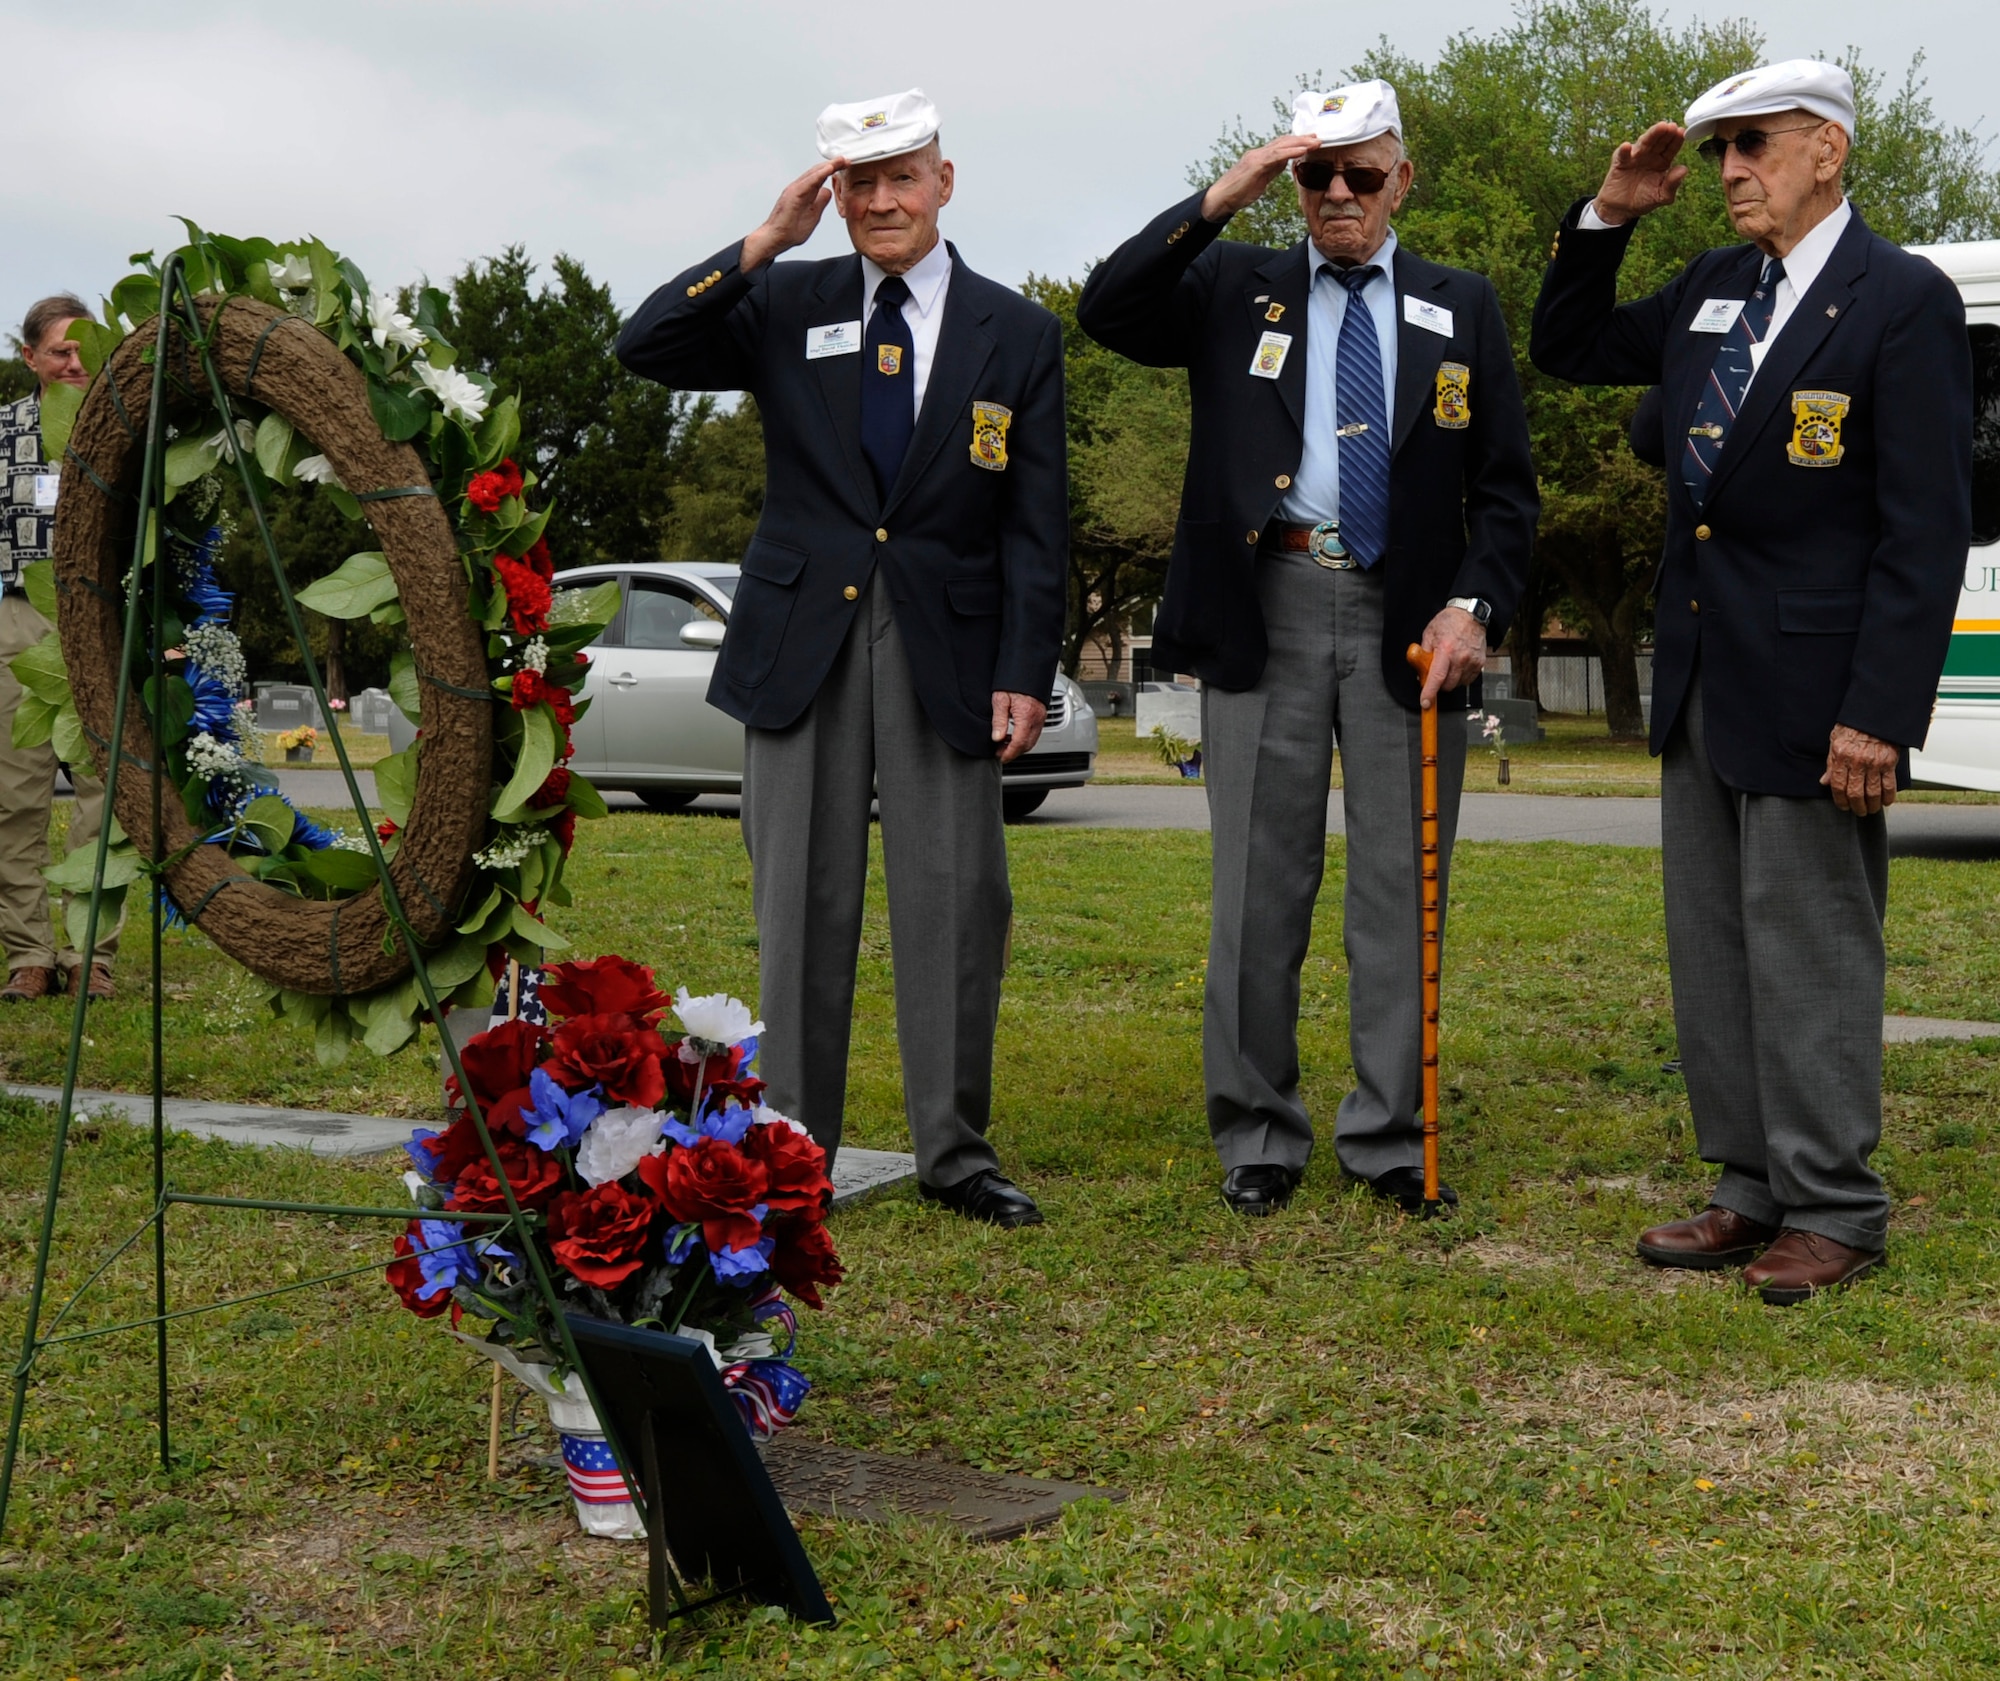 Form right, retired Lt. Col. Dick Cole, retired Lt. Col. Ed Saylor and retired Staff Sgt. David Thatcher salute their fallen brother, retired Master Sgt. Edwin Horton, April 18, 2013 in Fort Walton Beach, Fla. The men were all part of the Doolittle Raiders, who bombed Tokyo 71 years ago today. (U.S. Air Force Photo by Senior Airman Carlin Leslie)